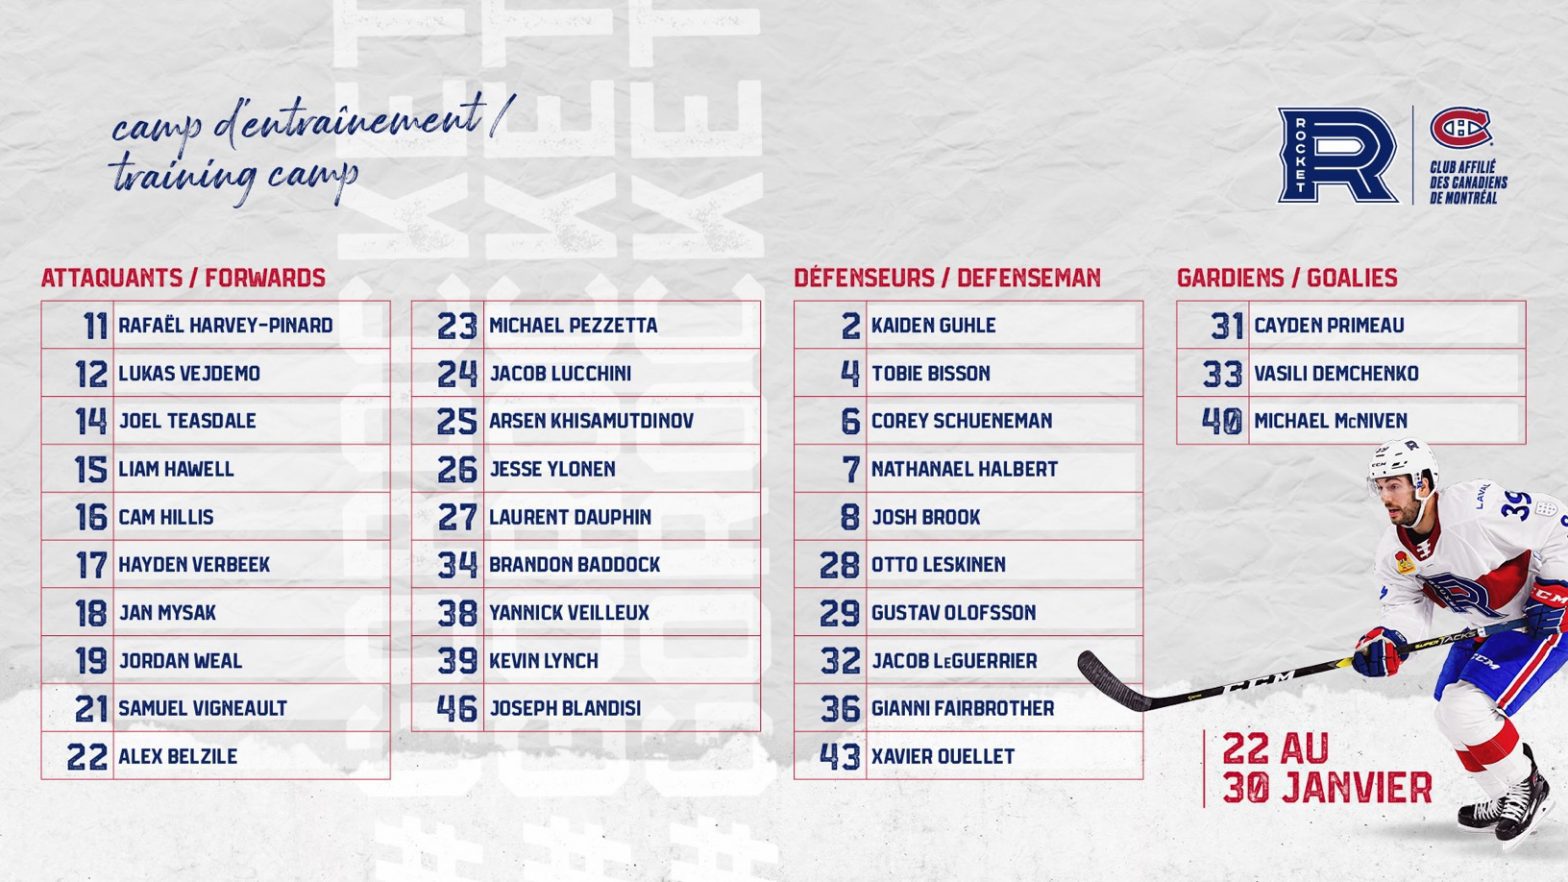 32 PLAYERS TO ATTEND THE LAVAL ROCKET TRAINING CAMP Rocket Laval